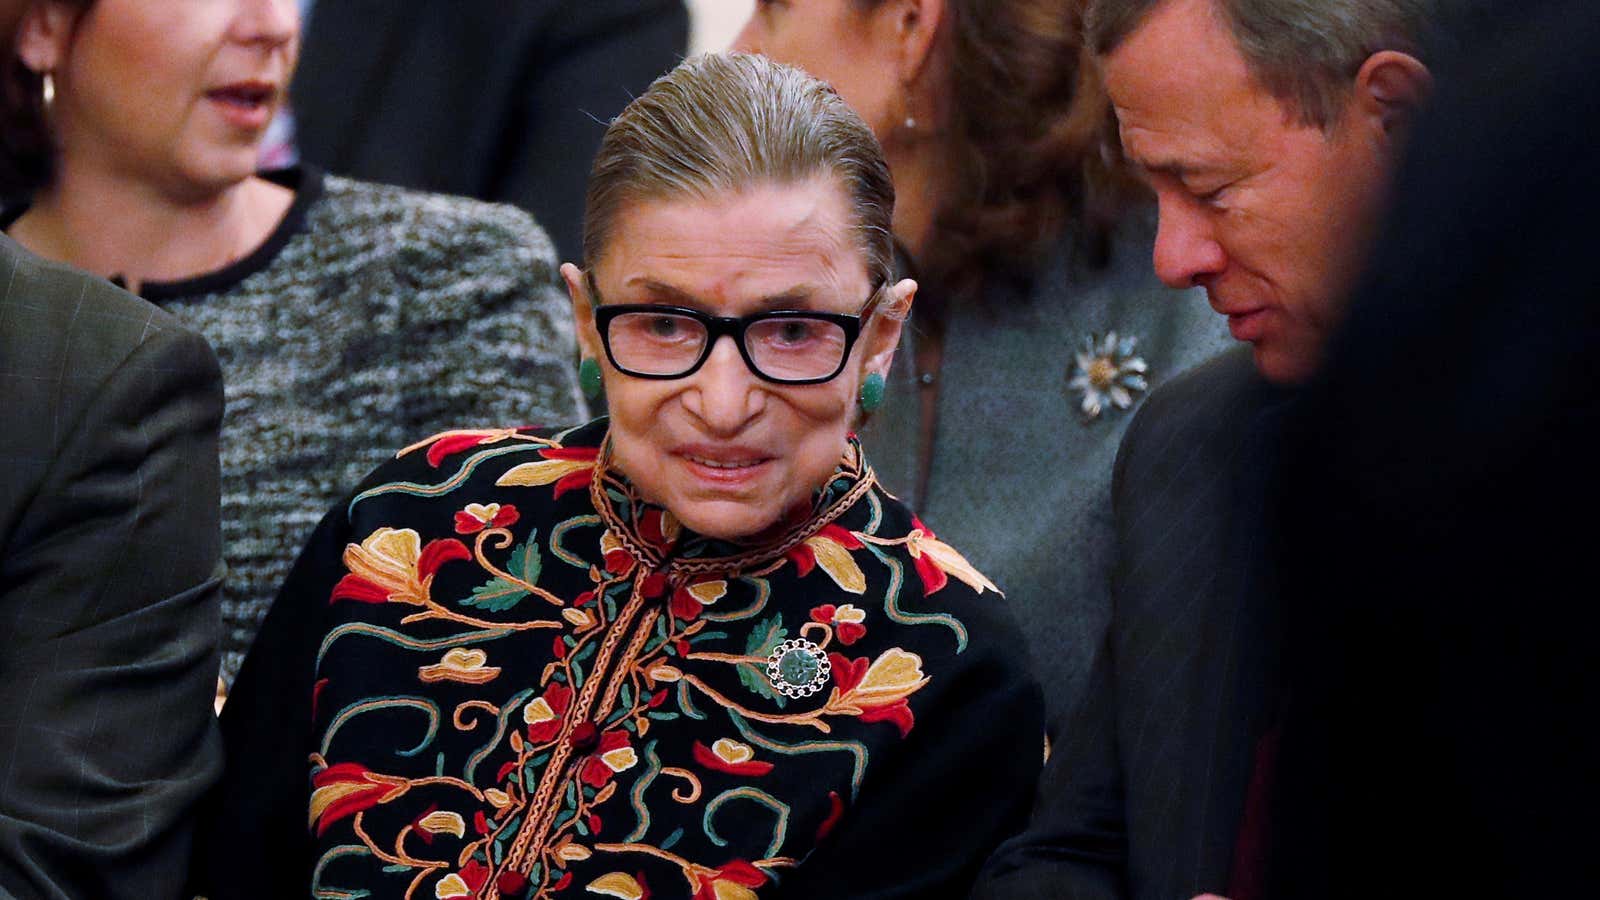 It’s probably best not to underestimate the will of Ruth Bader Ginsburg.